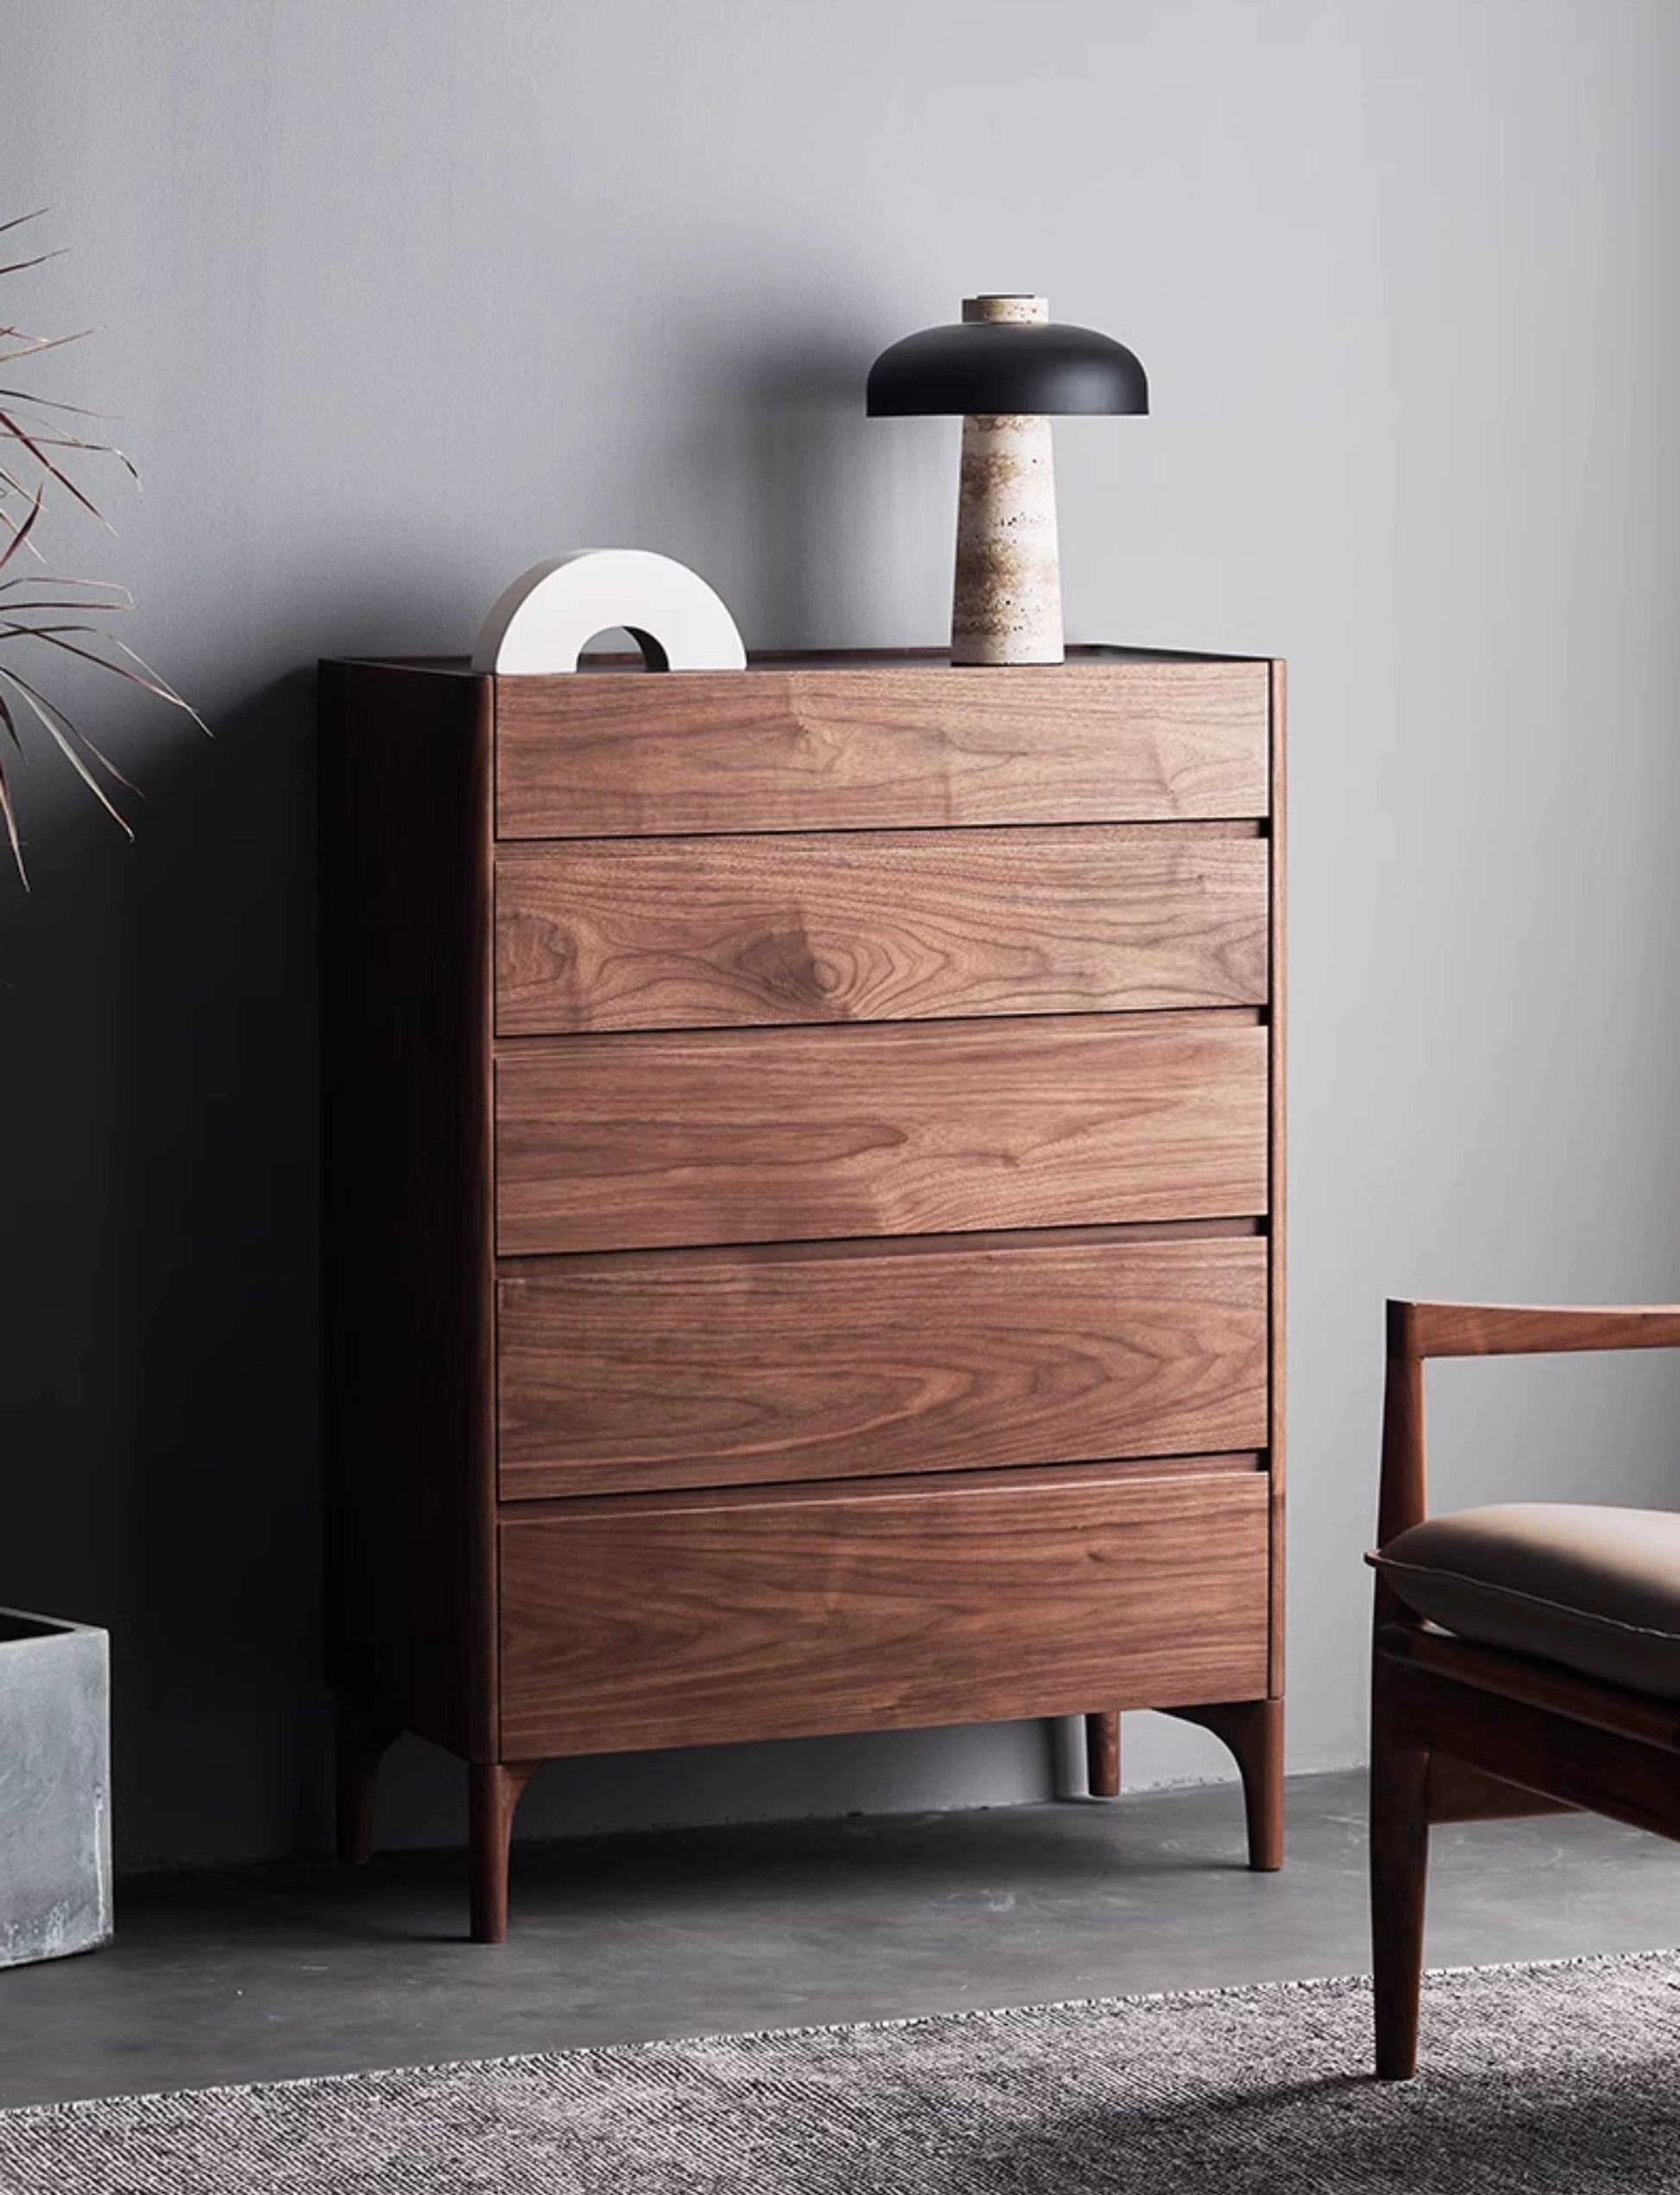 Keiko Solid Wood Chest of Drawers from maija